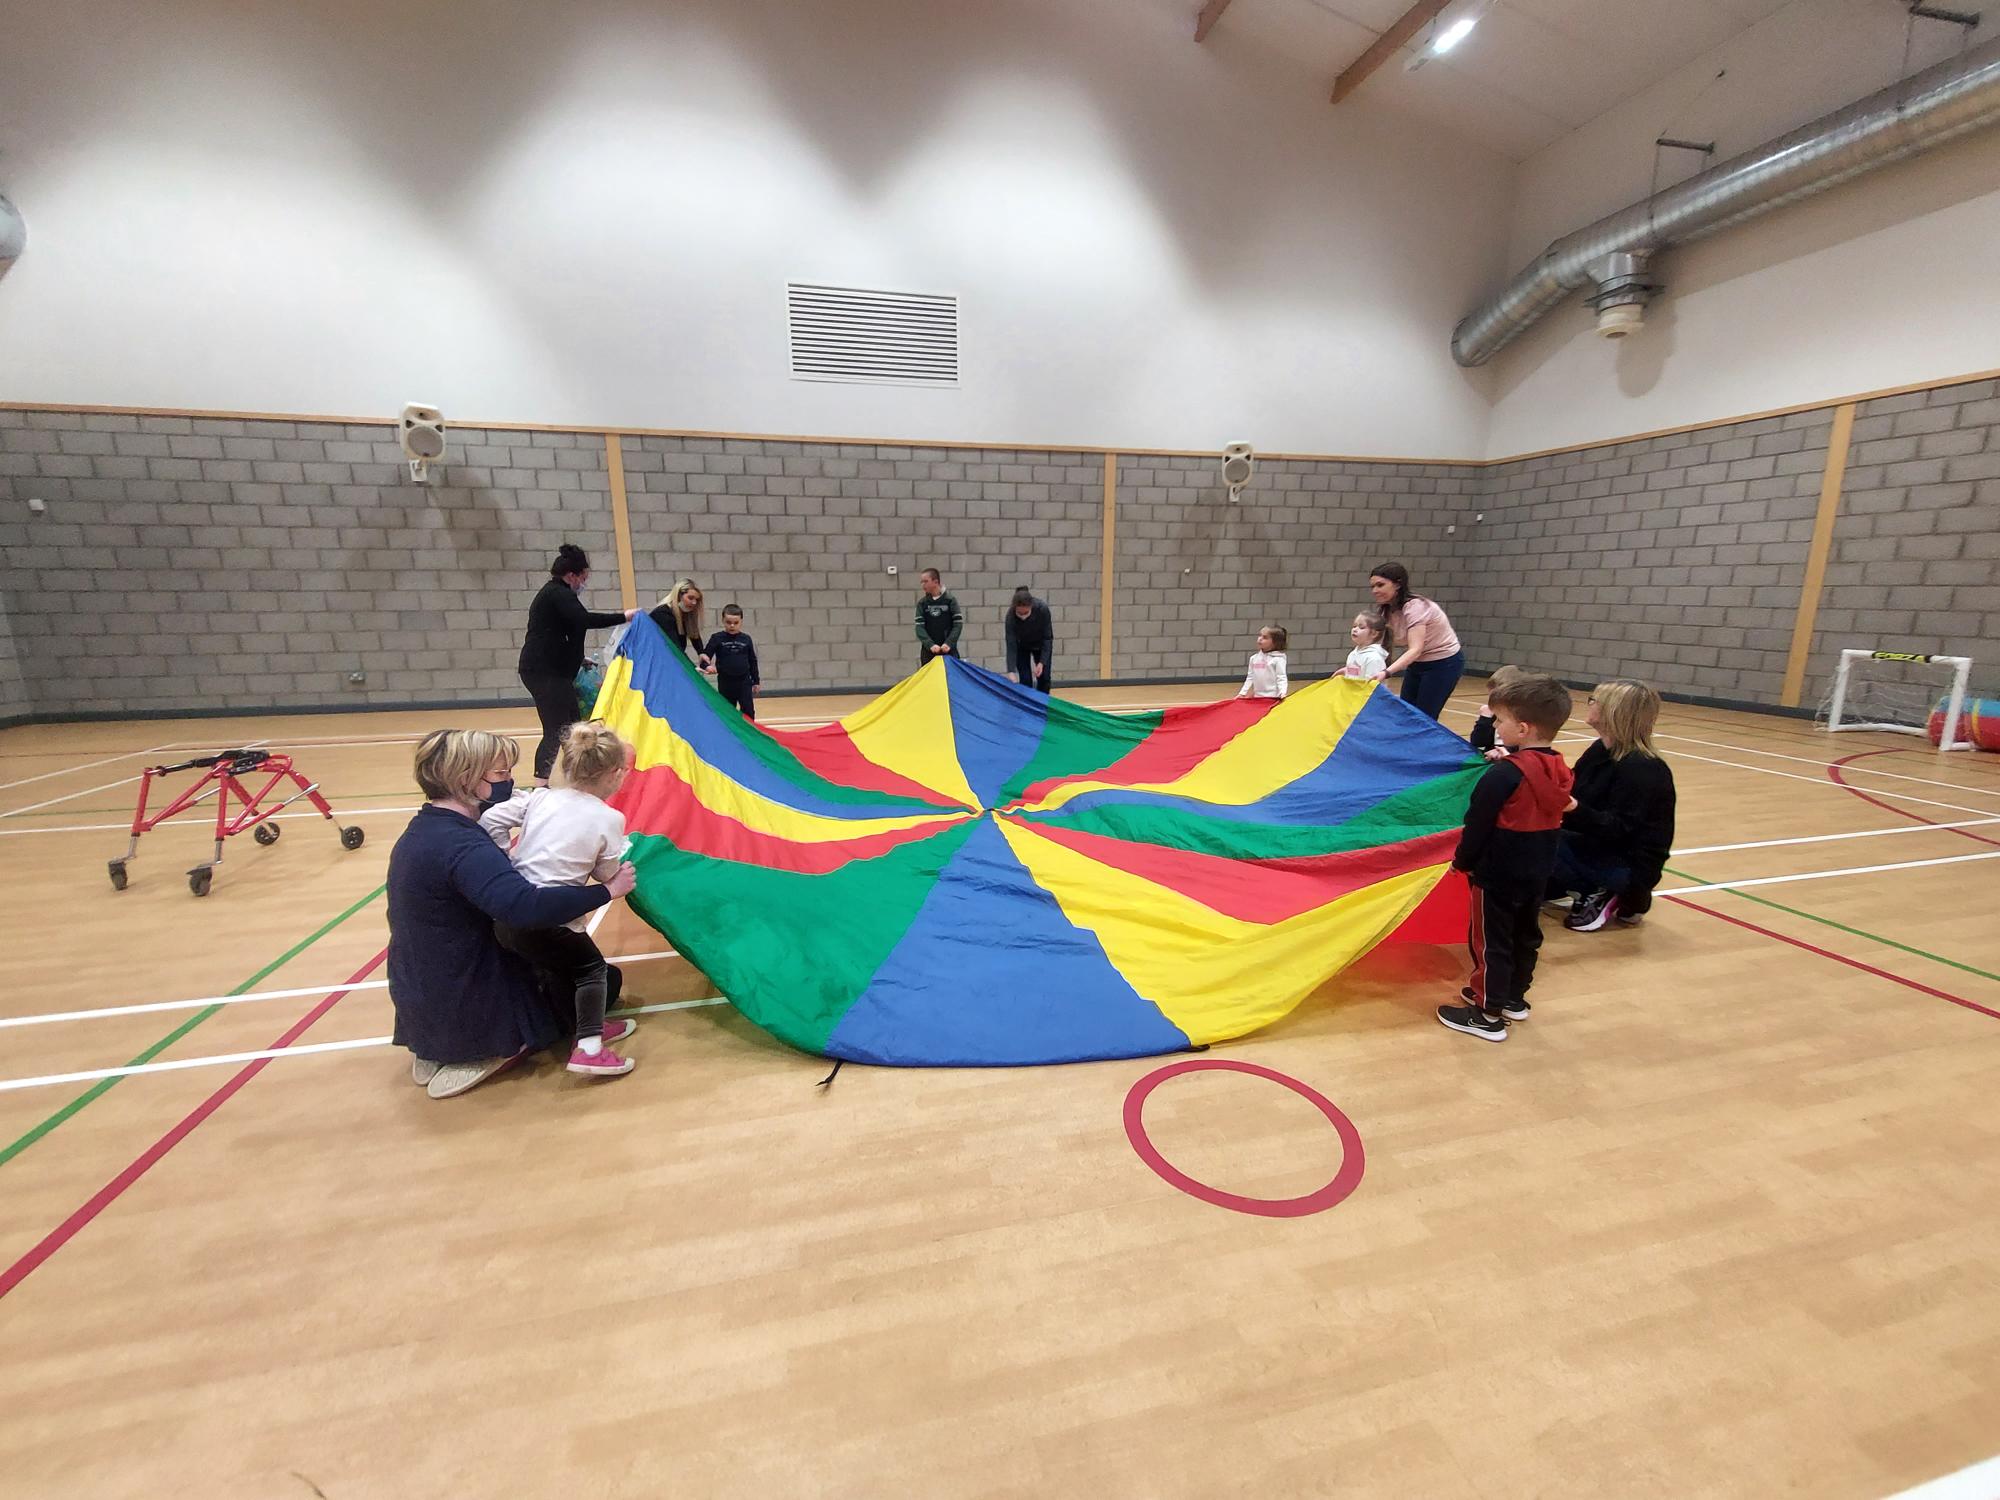 Pre-school children with disabilities and their parents and carers playing parachute games.